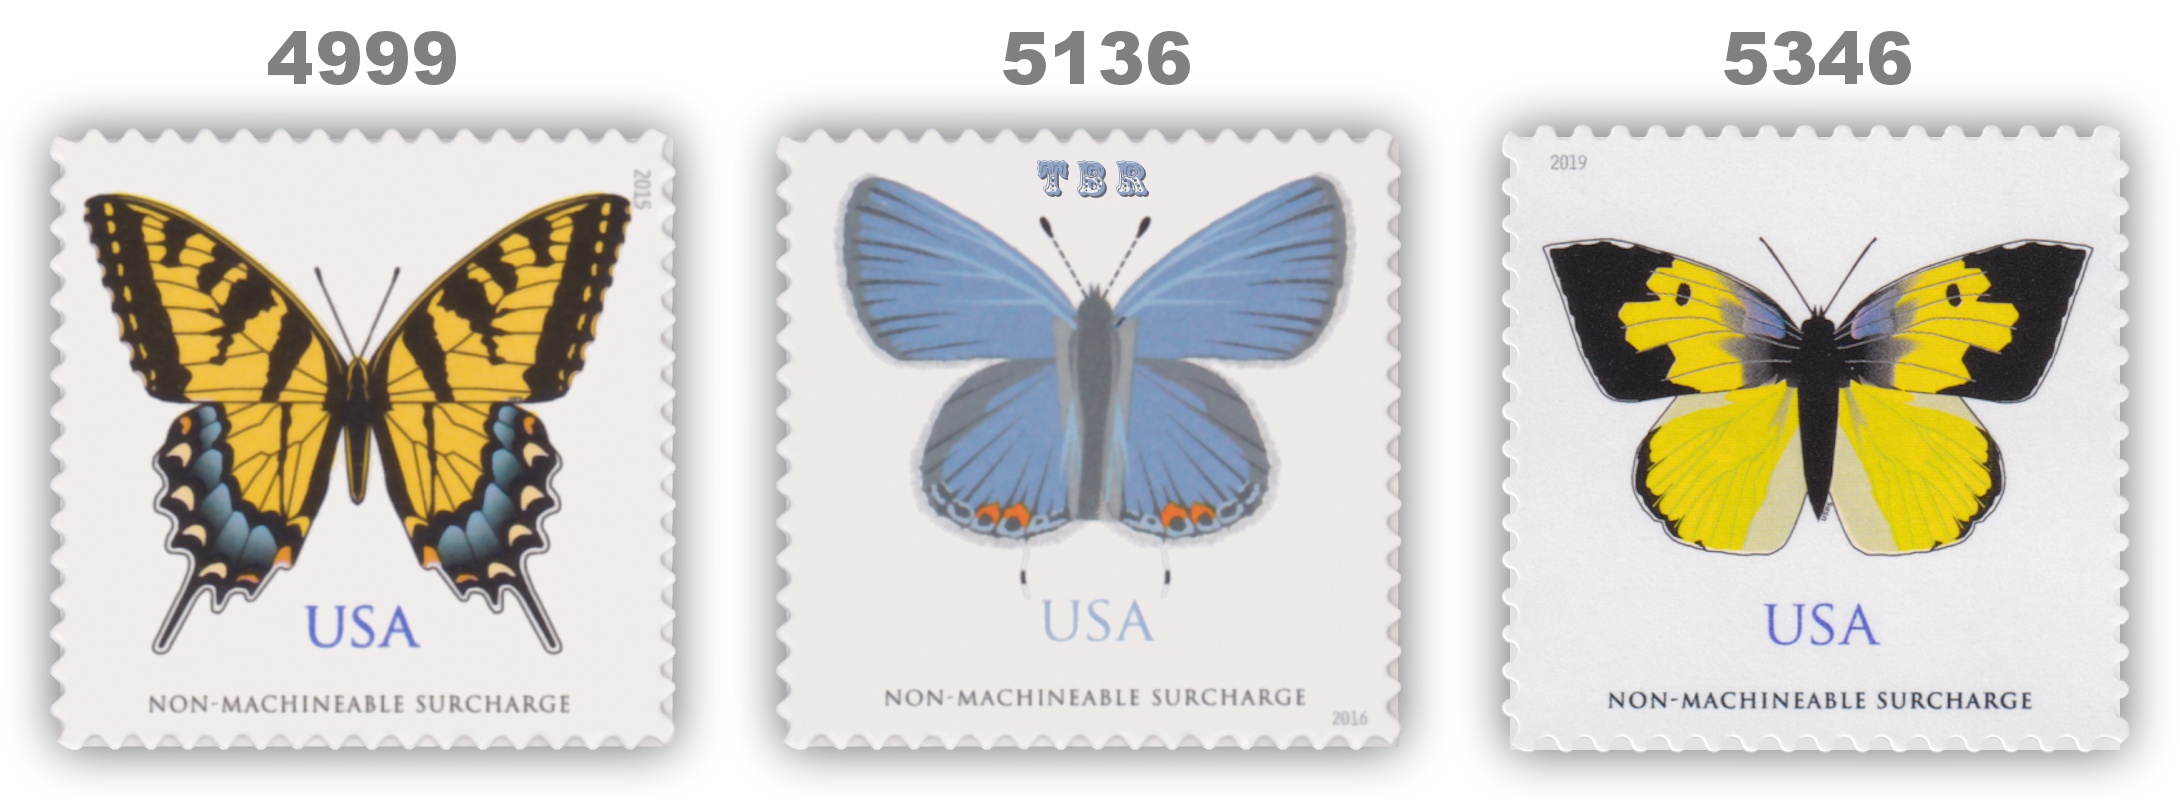 4999 5136 5346 Butterfly Set of 3 NonMachineable Surcharge Rate Stamps